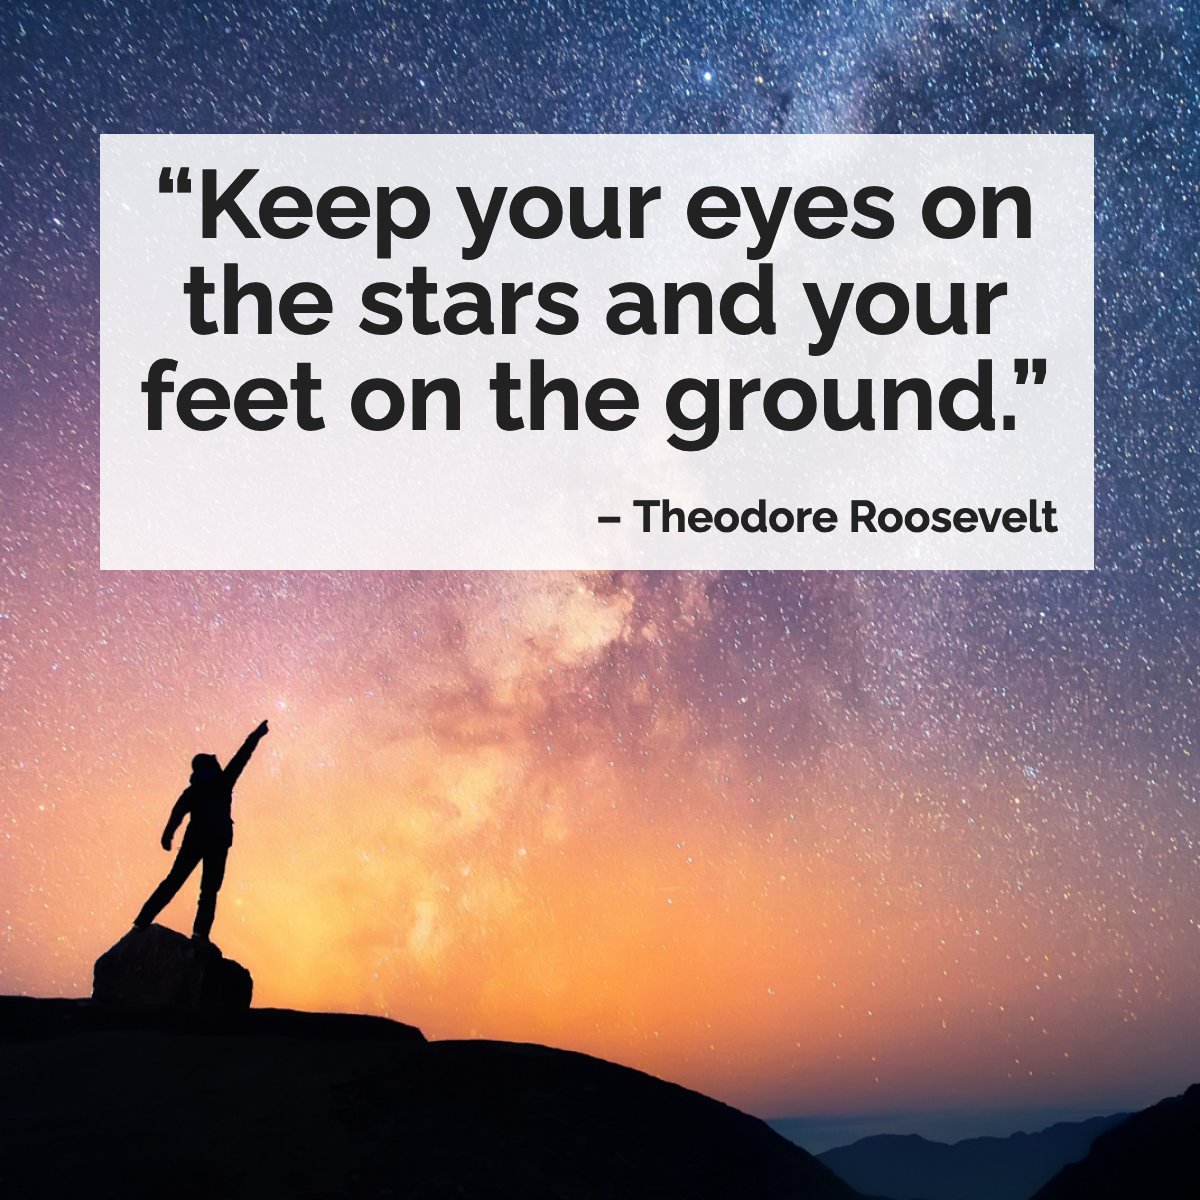 Dream big but stay grounded, that's the key ✨

 #wisdomquote #wisdomoftheday #quotegram #quoteoftheday  #theodoreroosevelt

 #dreamhome #homeowner #goals #homegoals #indianagoldgroup #indy #hometips #letstalk #indiana #indianarealestate #homedecor #motivation